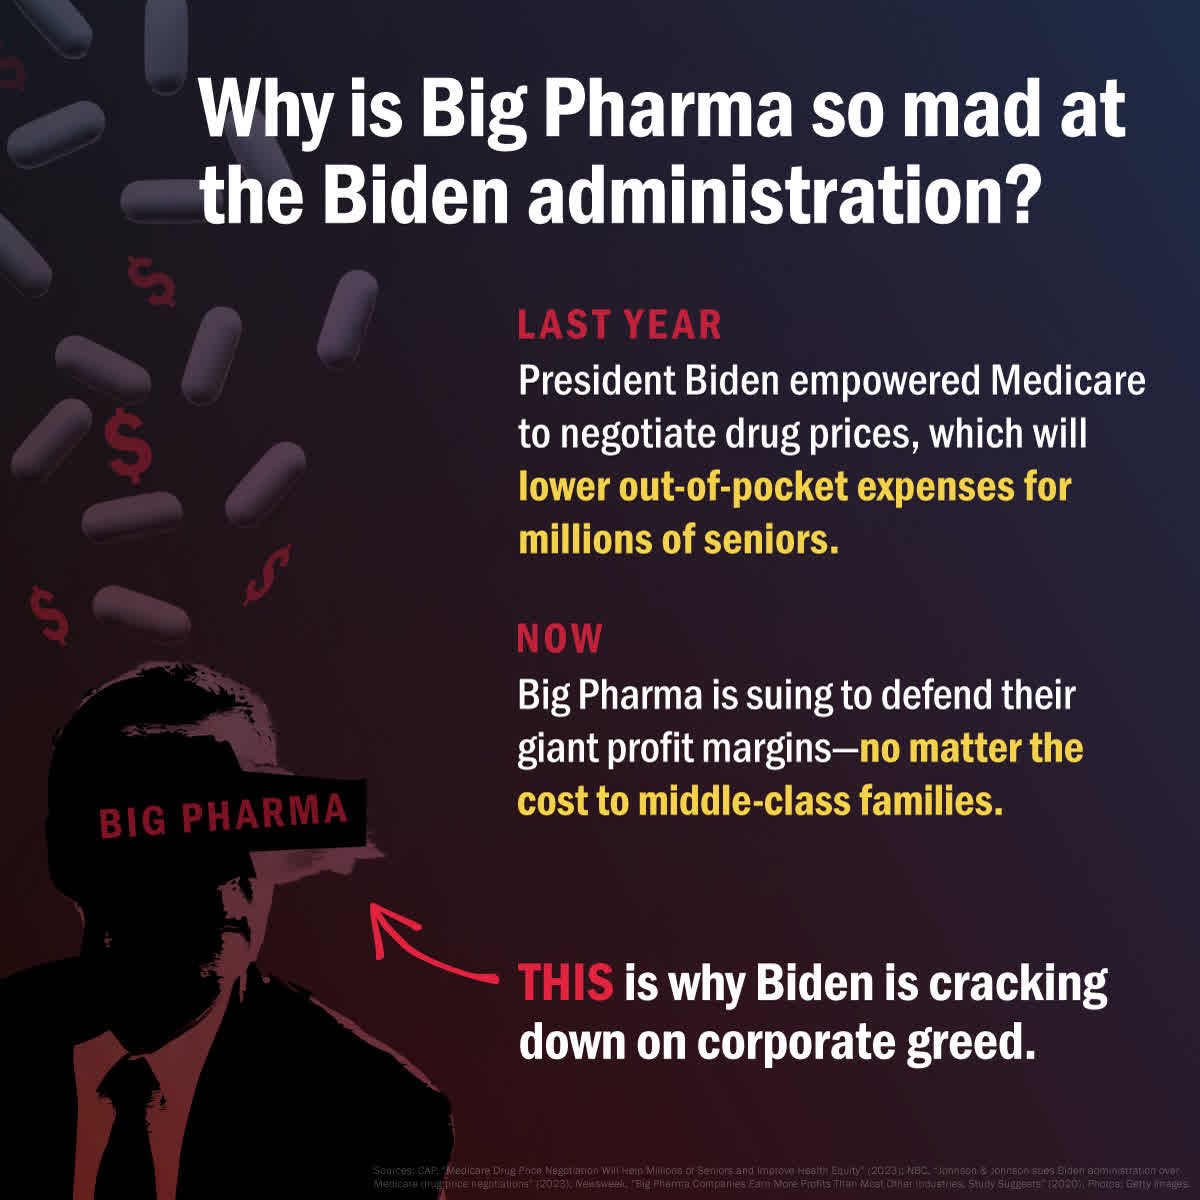 Did you know that Black, Latino, and Native American communities are disproportionately affected by asthma?

@POTUS efforts to cap inhaler costs at $35 per month will help address these racial disparities in healthcare

#BreatheEasierWithBiden 
#ProudBlue #DemsUnited #Allied4Dems